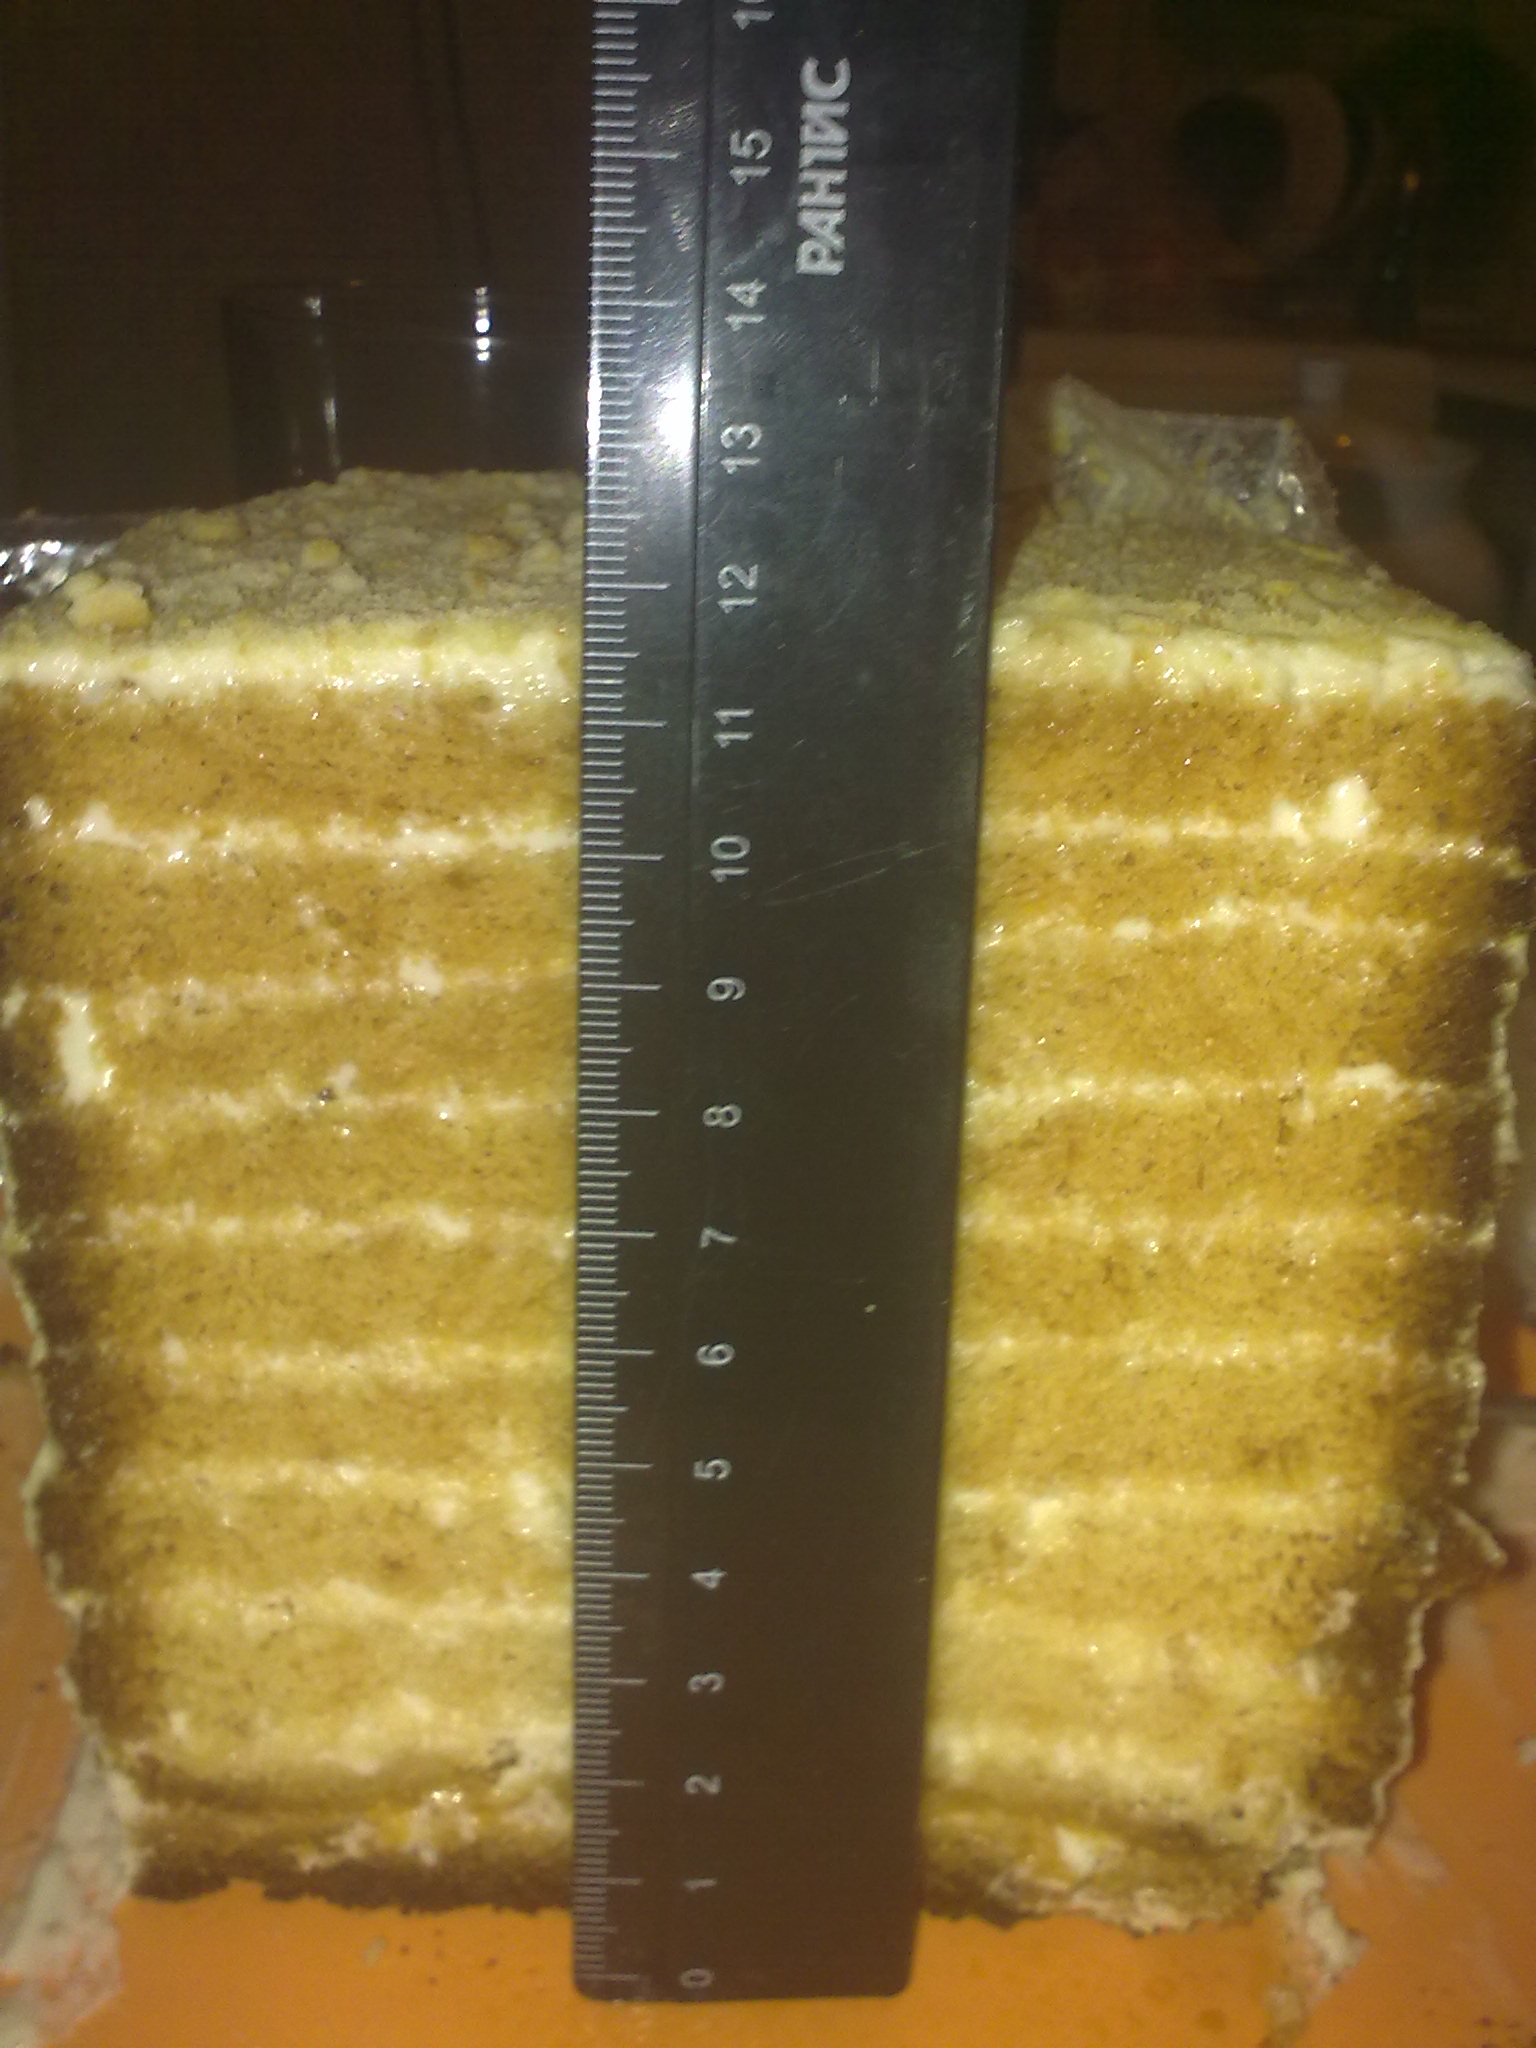 Honey cake in a slow cooker